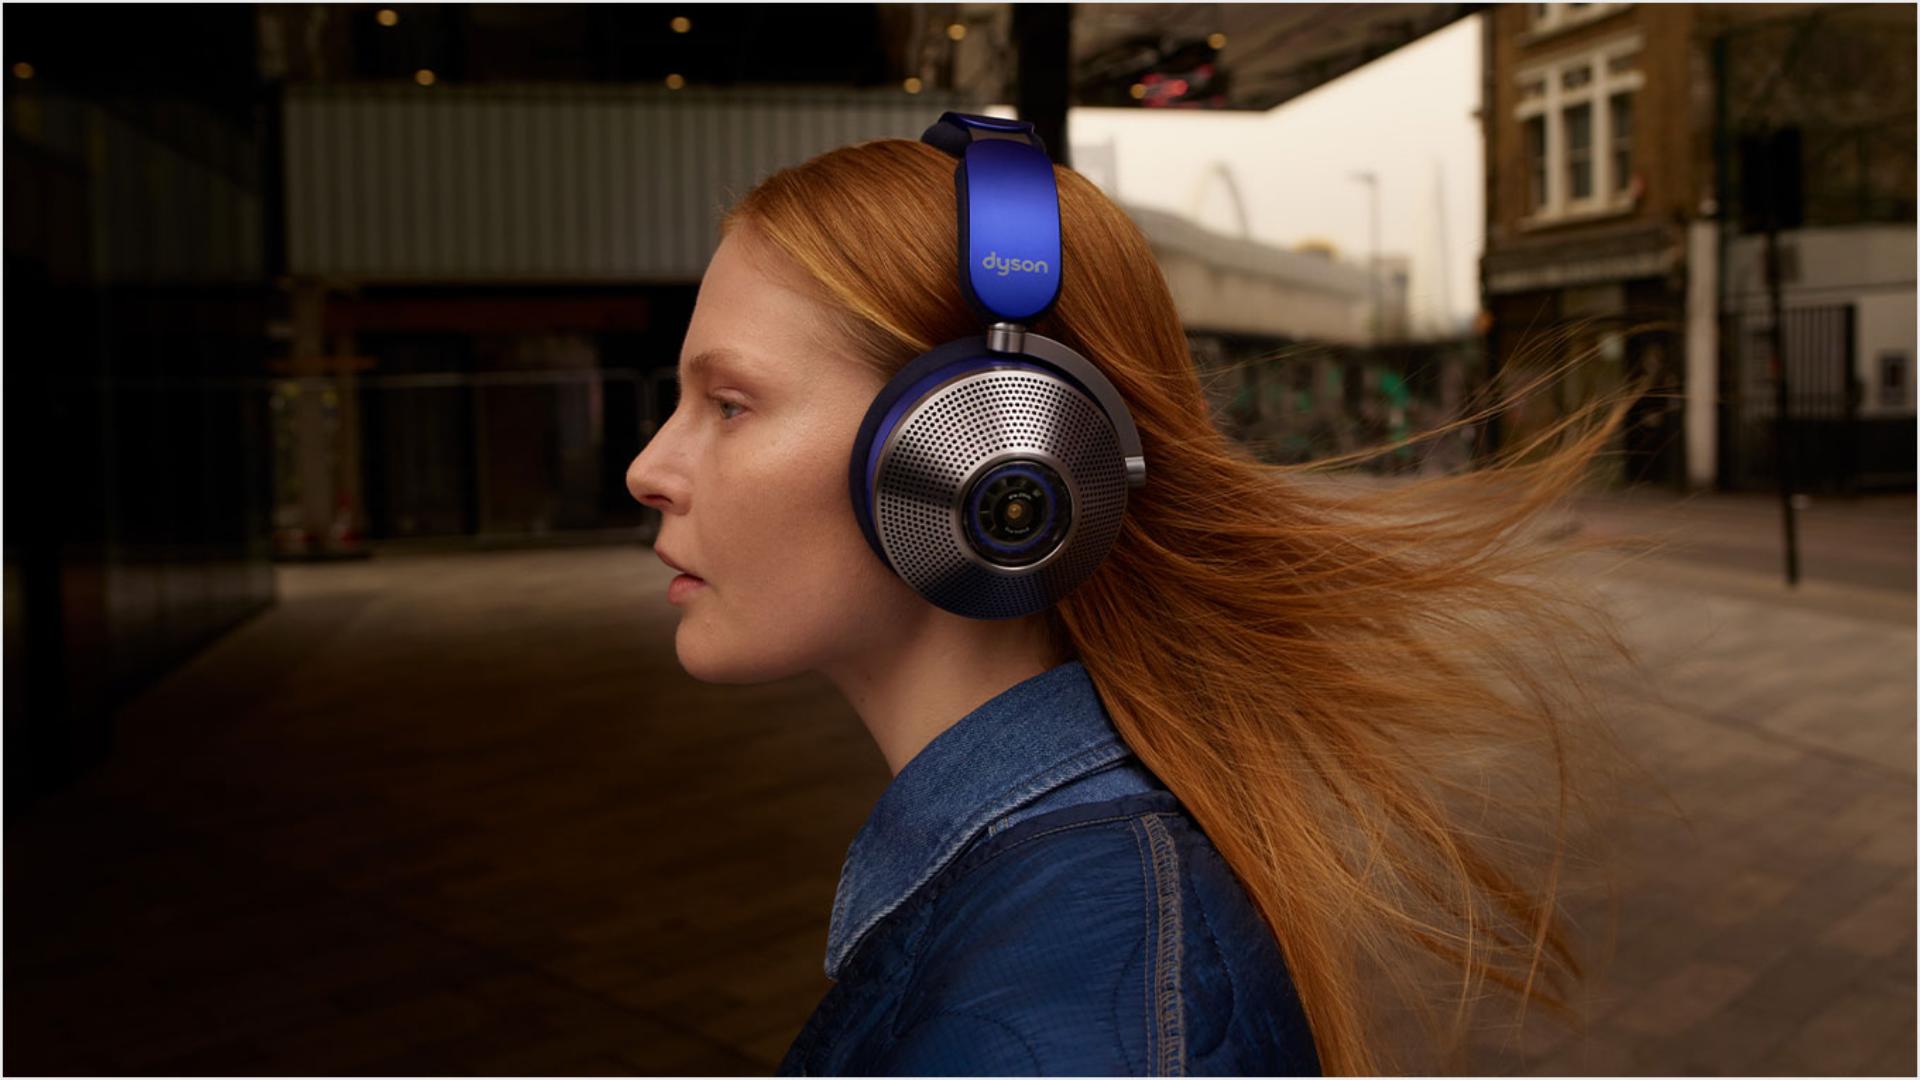 Woman using Dyson Zone headphones with air purification with her smartphone.